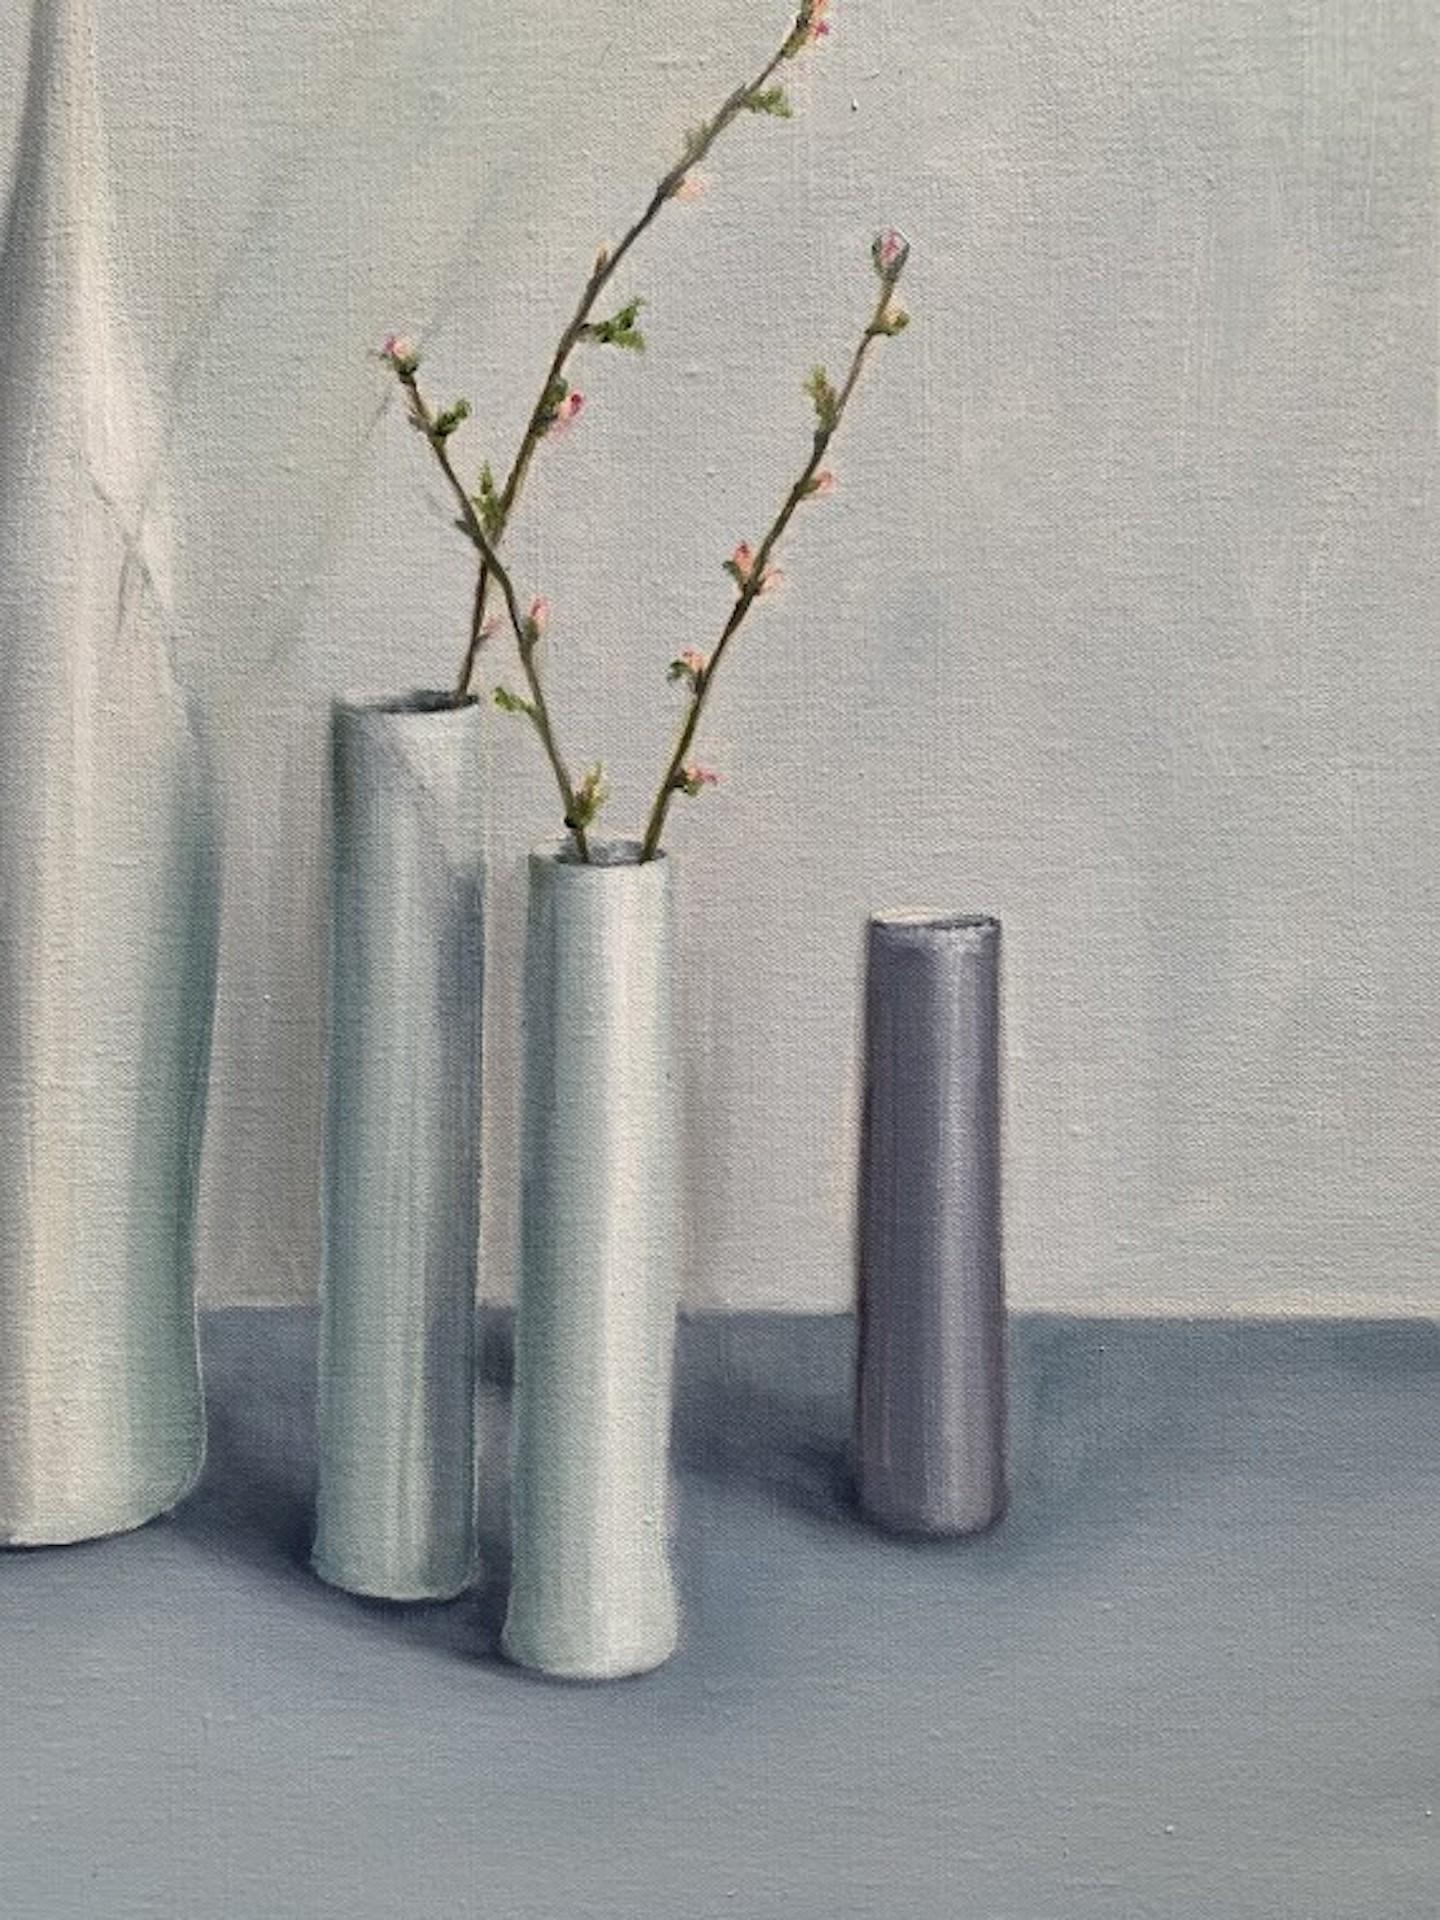 Bottles and Cylinders with Cherry Clossom Twigs [2021]
Original
Still Life
Oil Paint on Canvas
Image size: H:60 cm x W:70 cm
Complete Size of Unframed Work: H:60 cm x W:70 cm x D:1.5cm
Framed Size: H:67.5 cm x W:77.5 cm x D:4cm
Sold Framed
Please